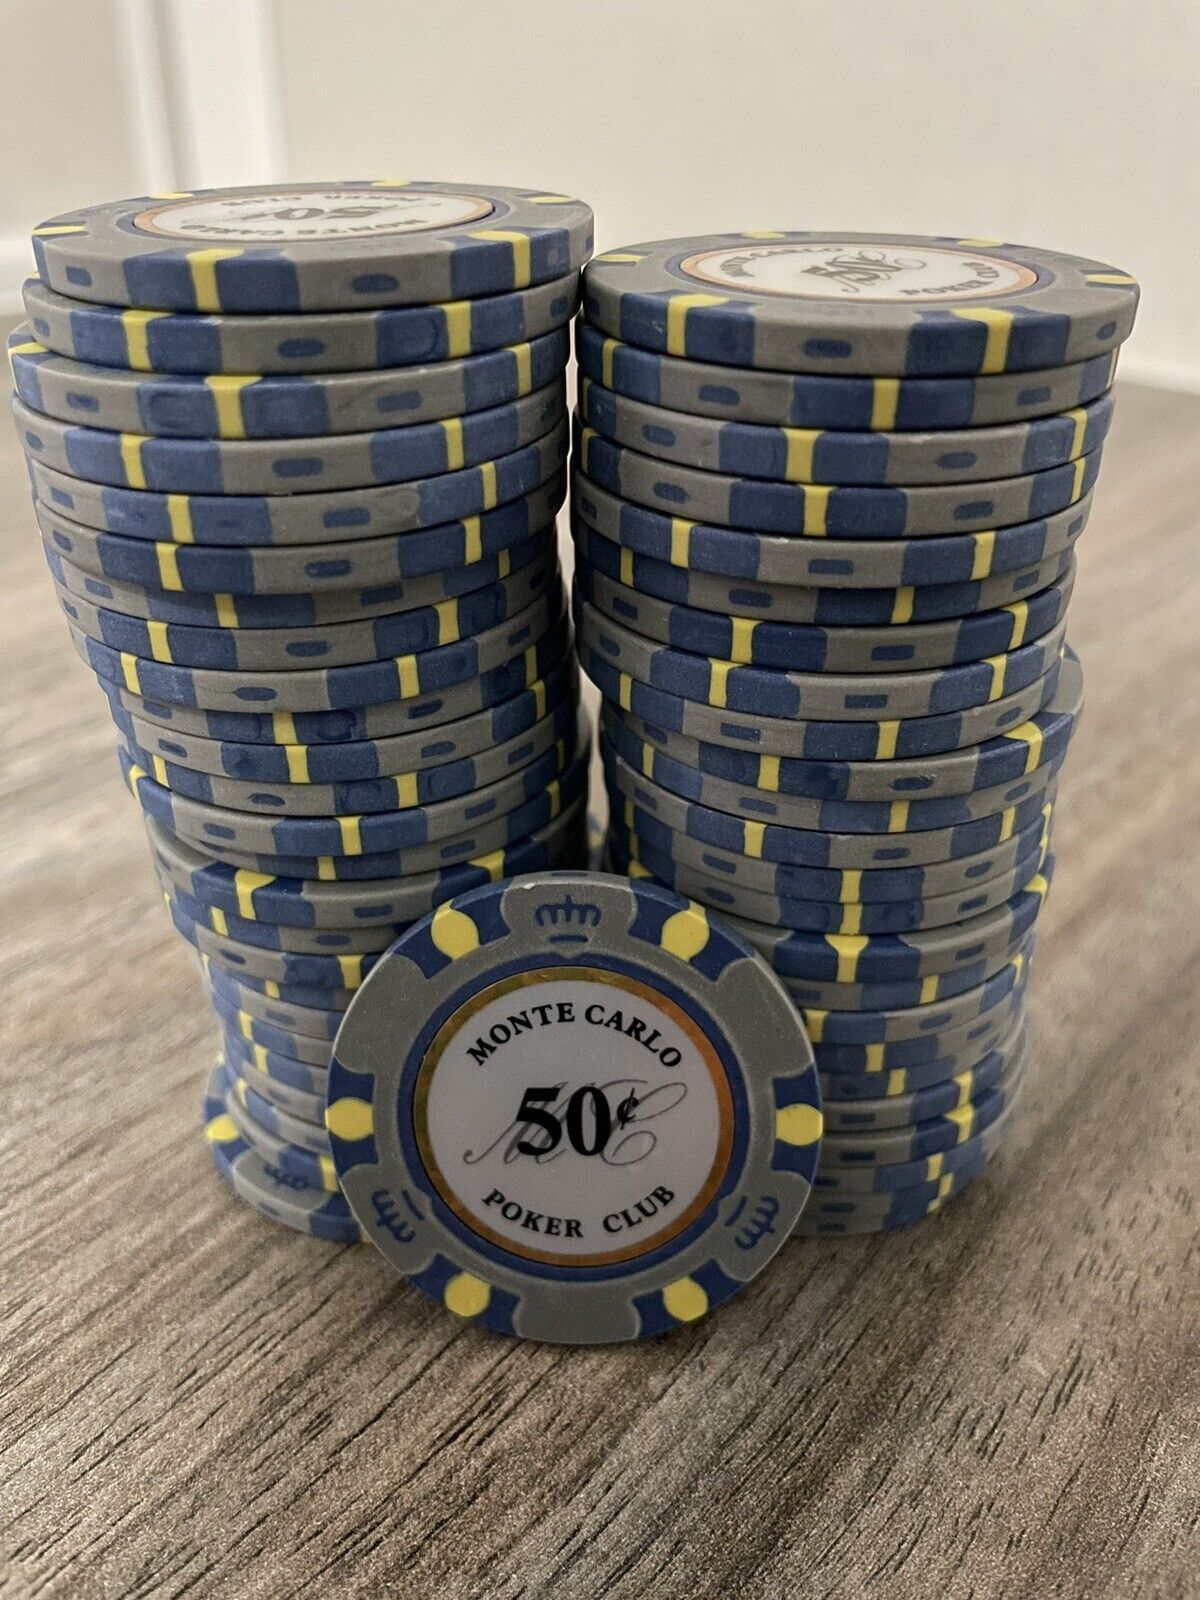 NEW 50 Gray 50¢ Cent Monte Carlo 14 Gram Clay Poker Chips